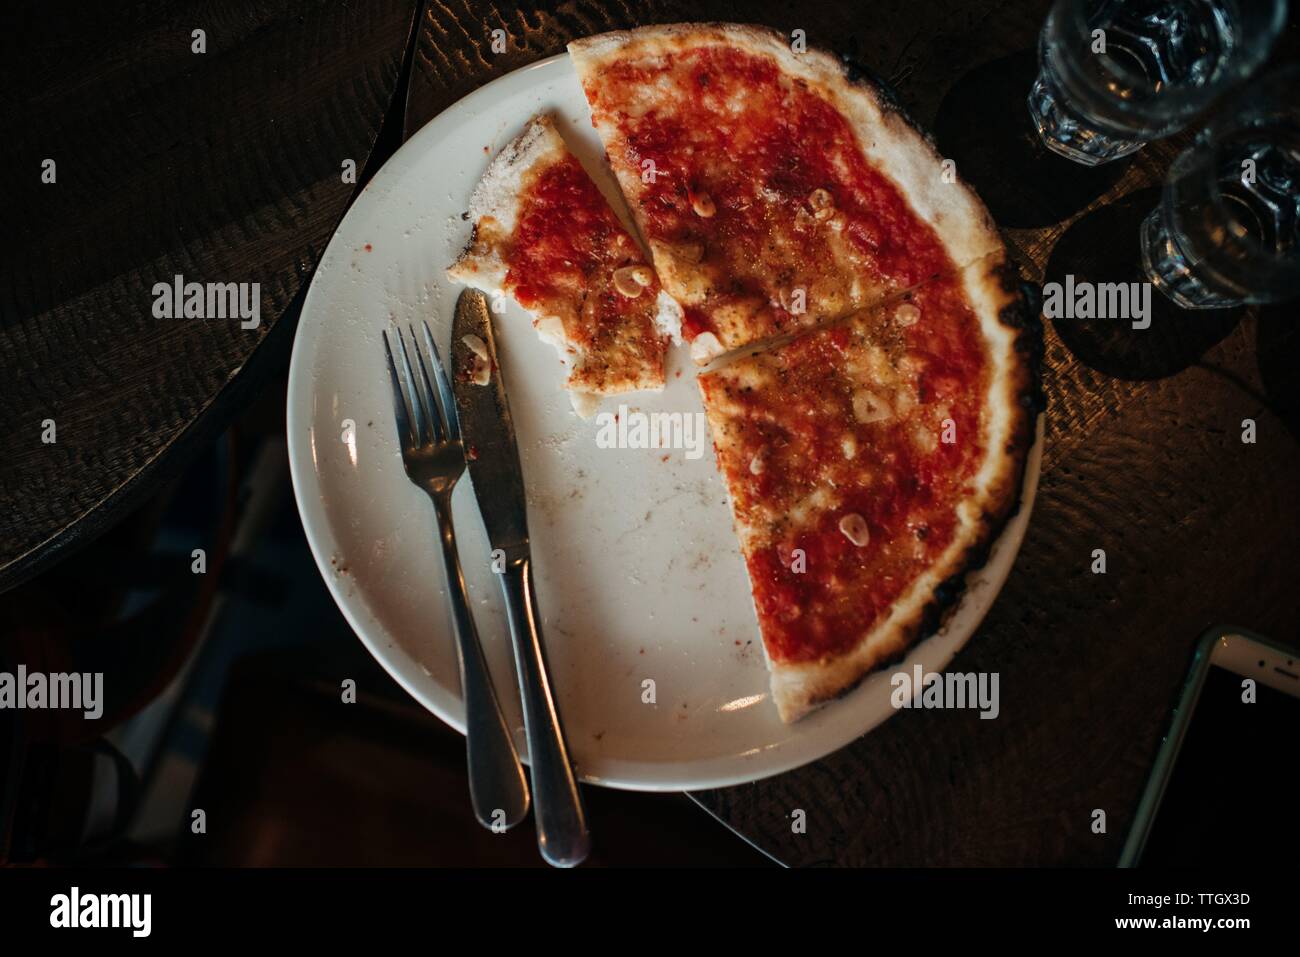 gluten free & vegan Pizza on a plate with knife & fork in restaurant Stock Photo